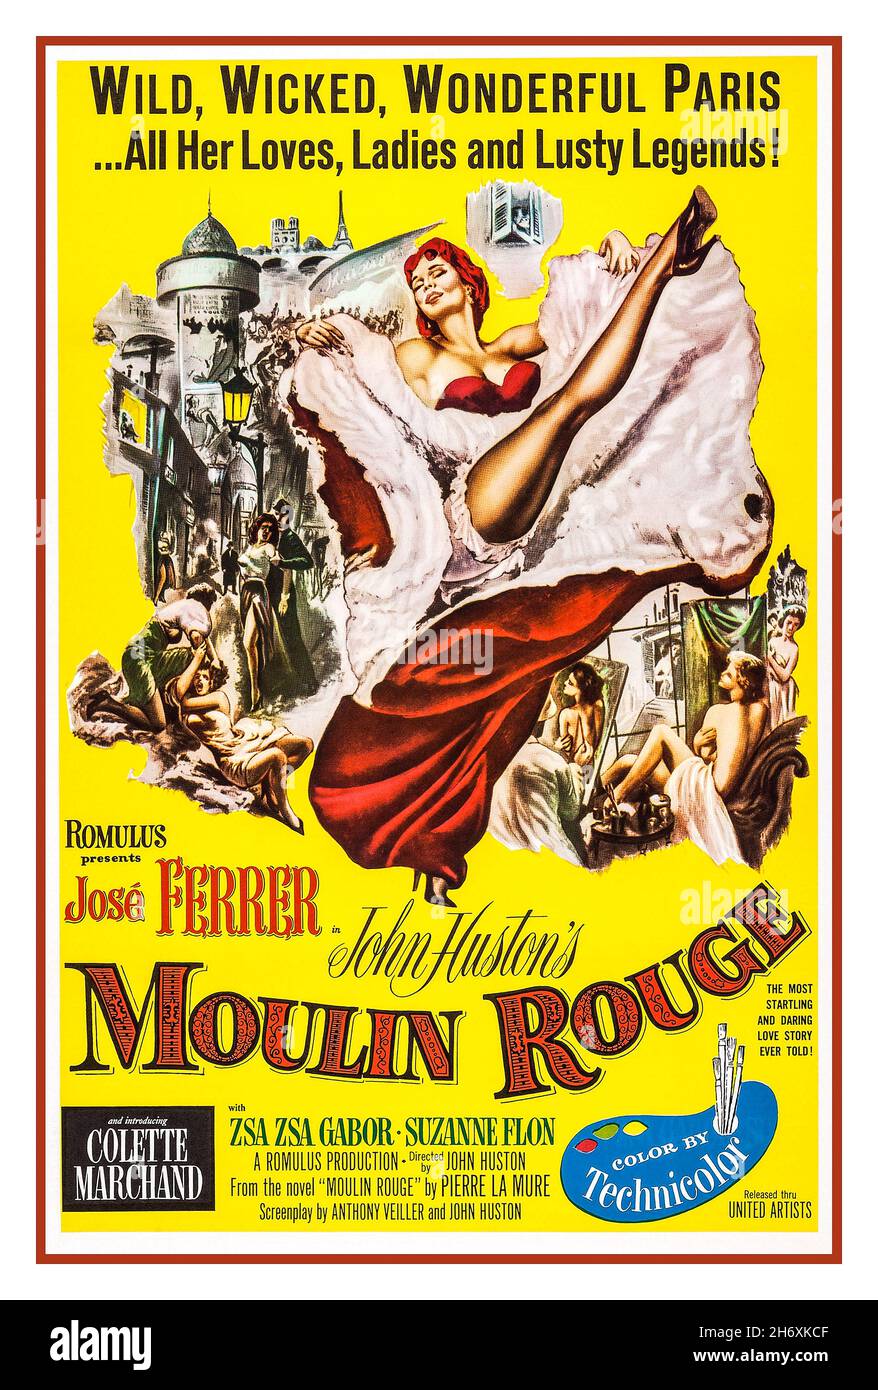 Moulin Rouge 1950s vintage movie film poster is a 1952 British drama film directed by John Huston, produced by John and James Woolf for their Romulus Films company and released by United Artists. The film is set in Paris in the late 19th century, following artist Henri de Toulouse-Lautrec in the city's bohemian subculture in the Moulin Rouge. The screenplay is by Huston, based on the 1950 novel by Pierre La Mure. The cinematography was by Oswald Morris. This film was screened at the 14th Venice International Film Festival where it won the Silver Lion. Stock Photo